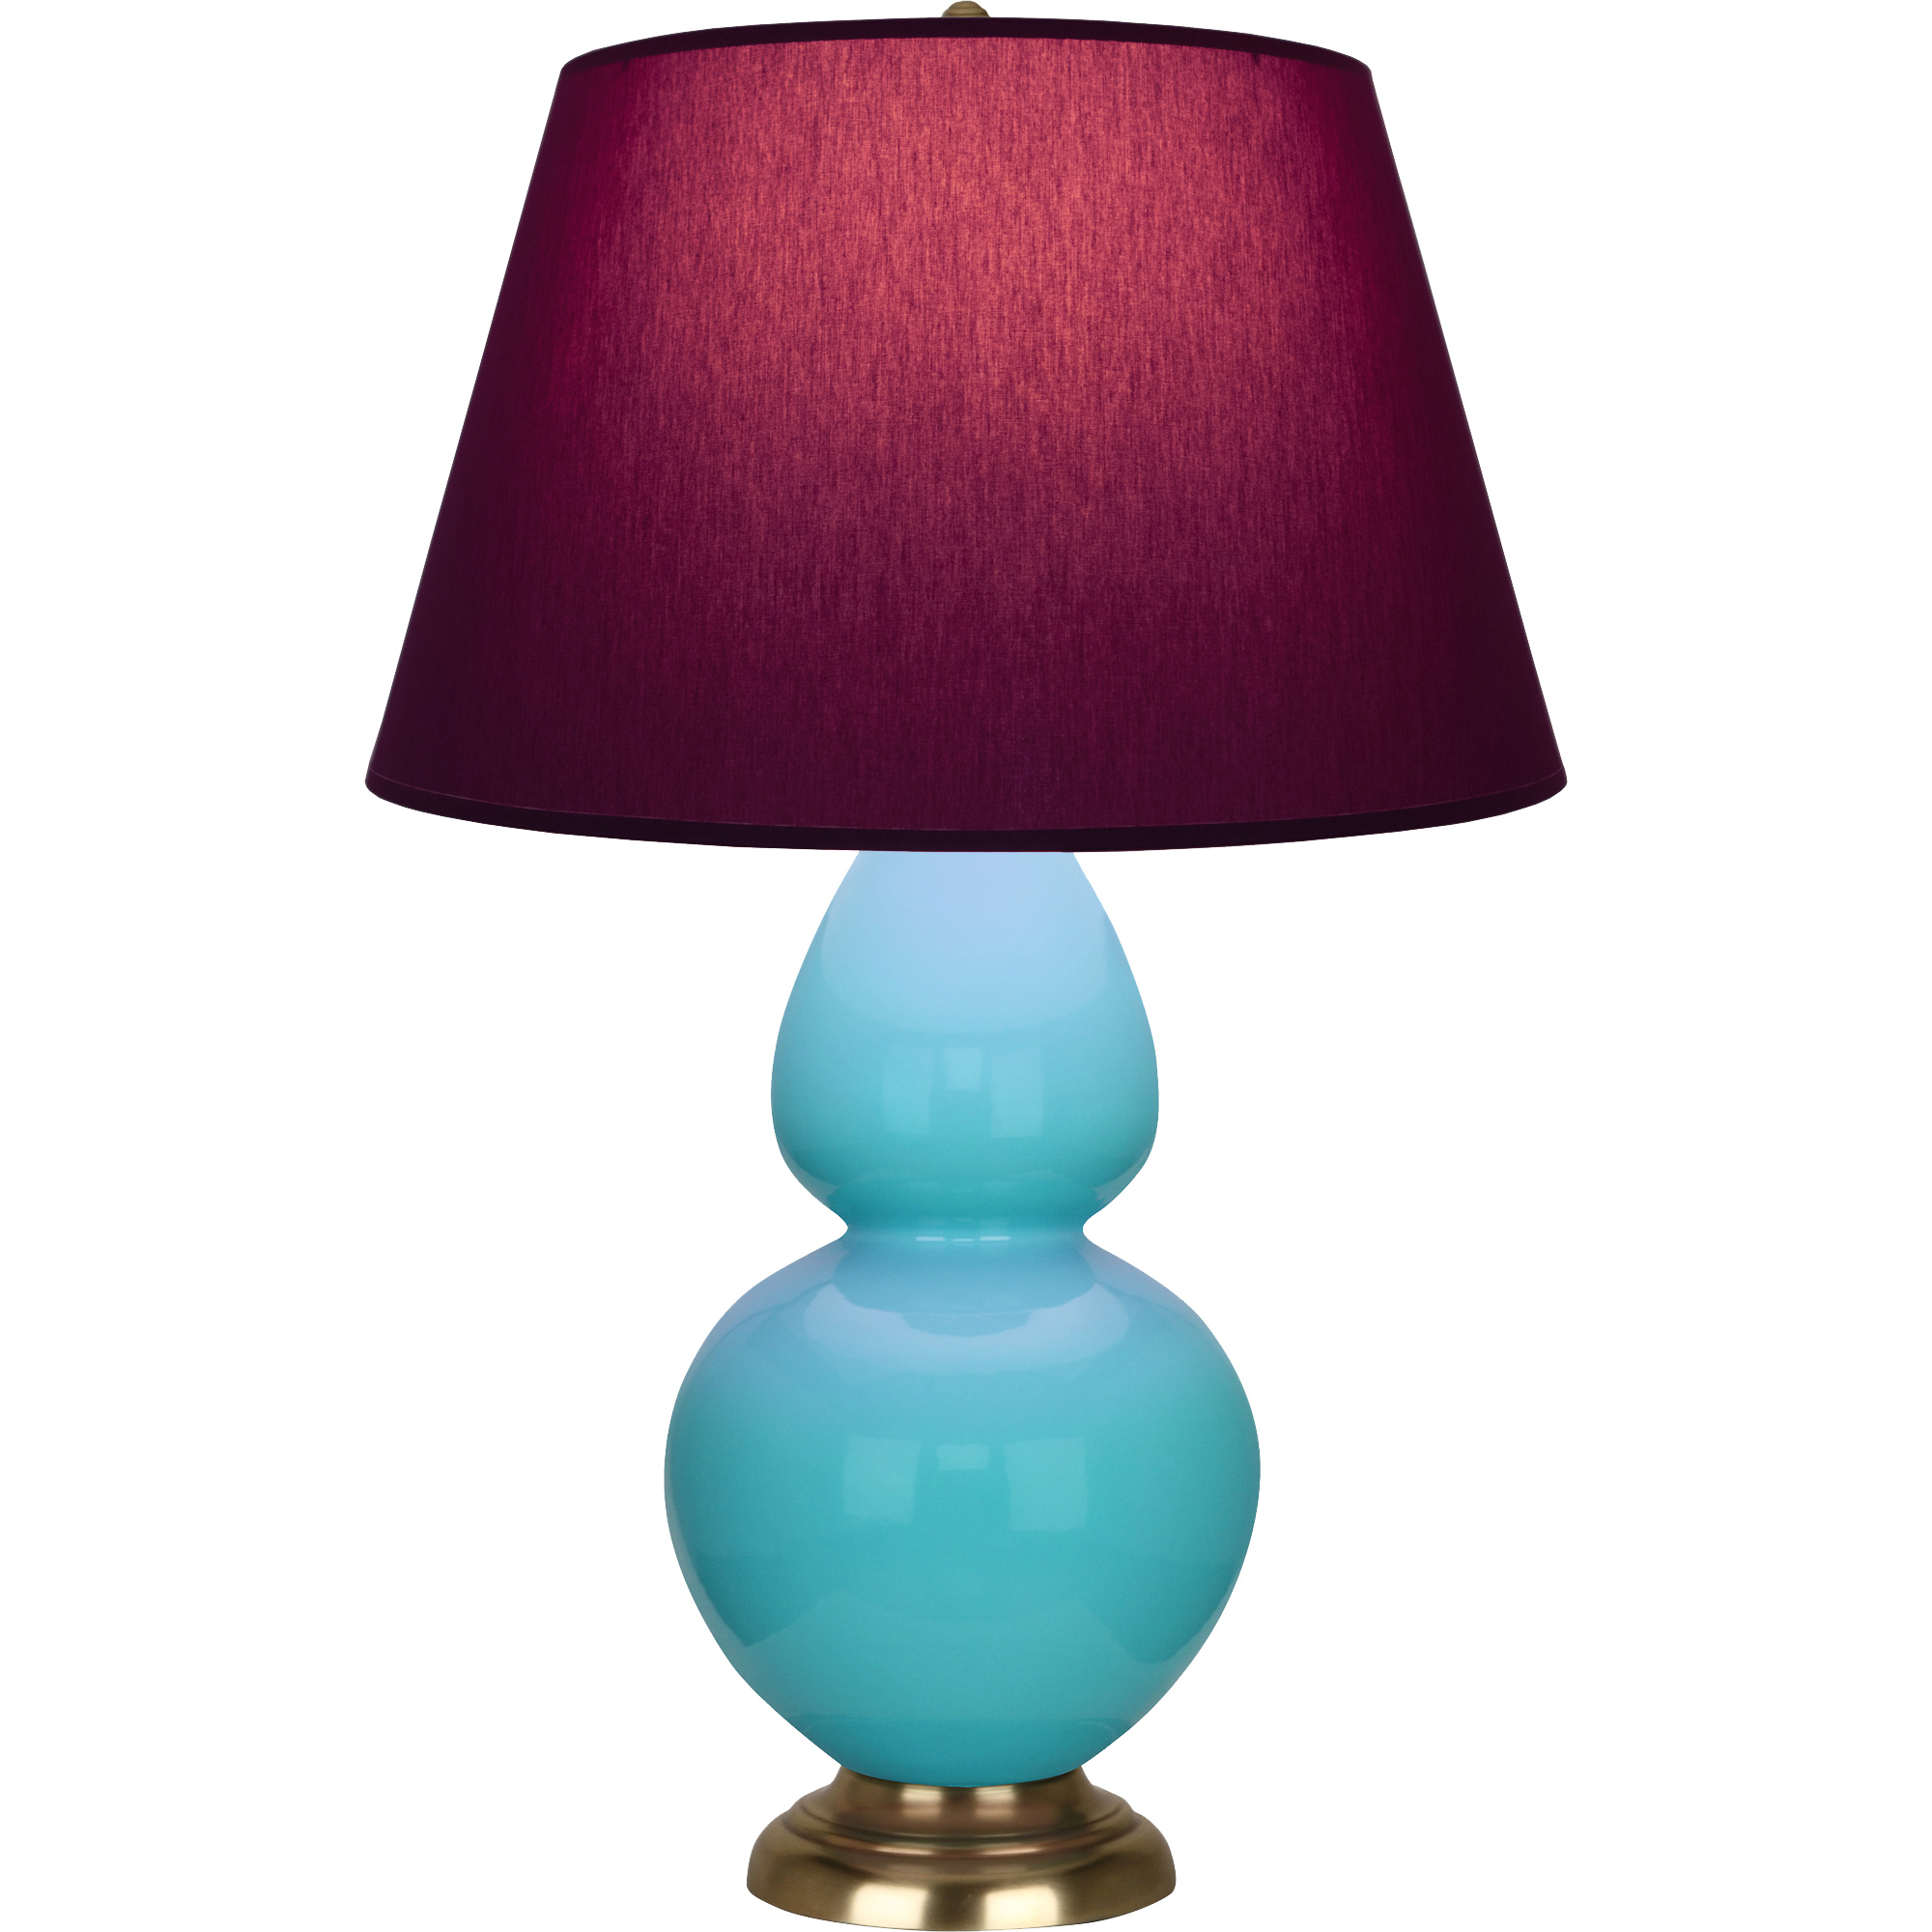 Double Gourd Table Lamp Style #1740P